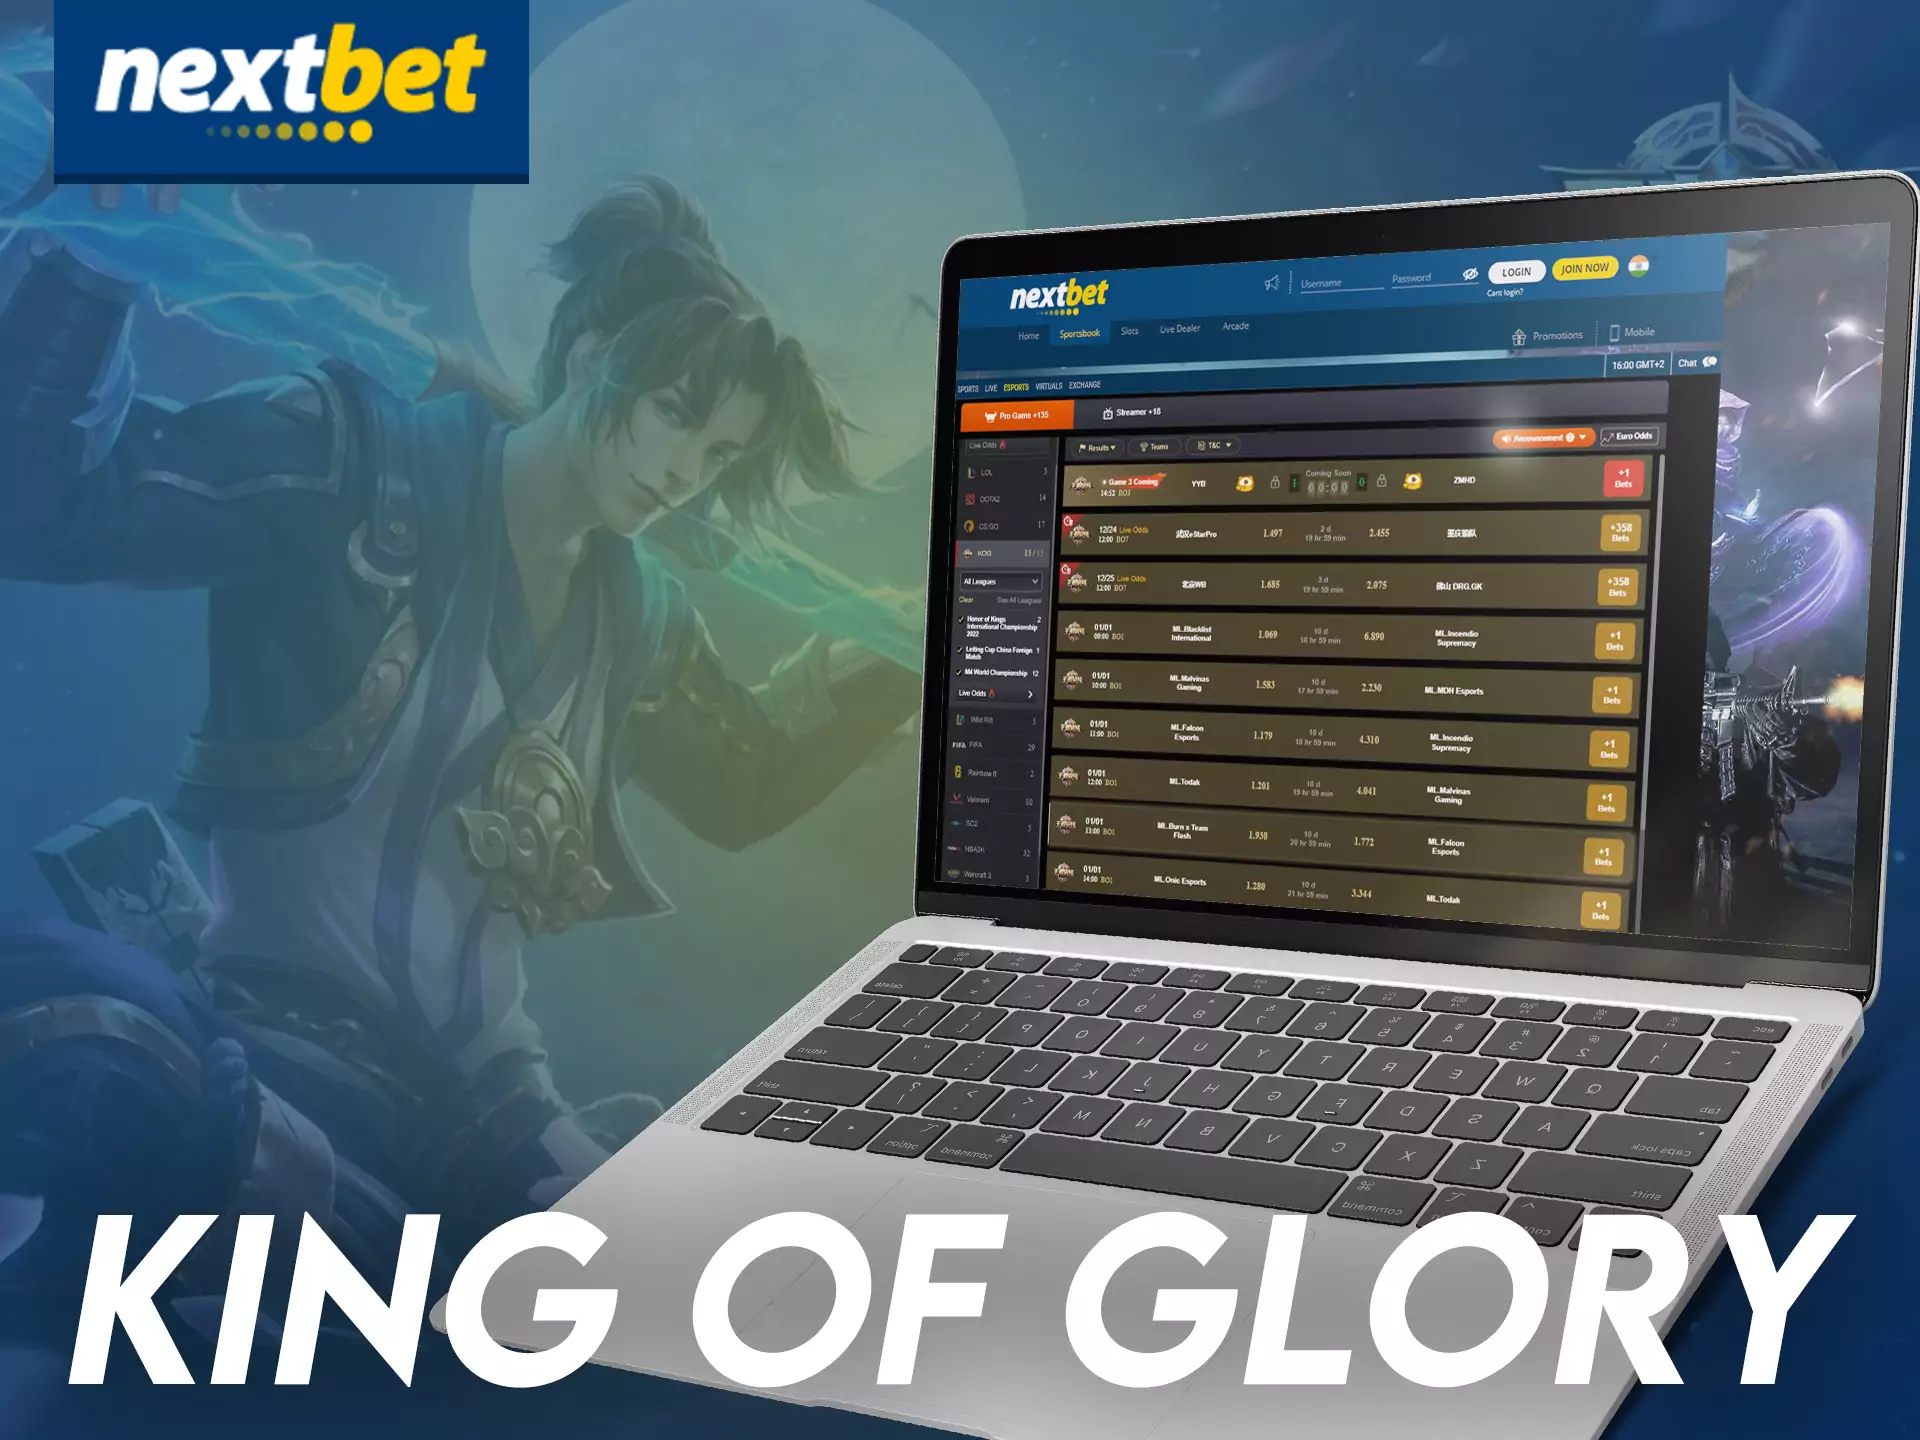 Nextbet offers to bet on King of Glory.